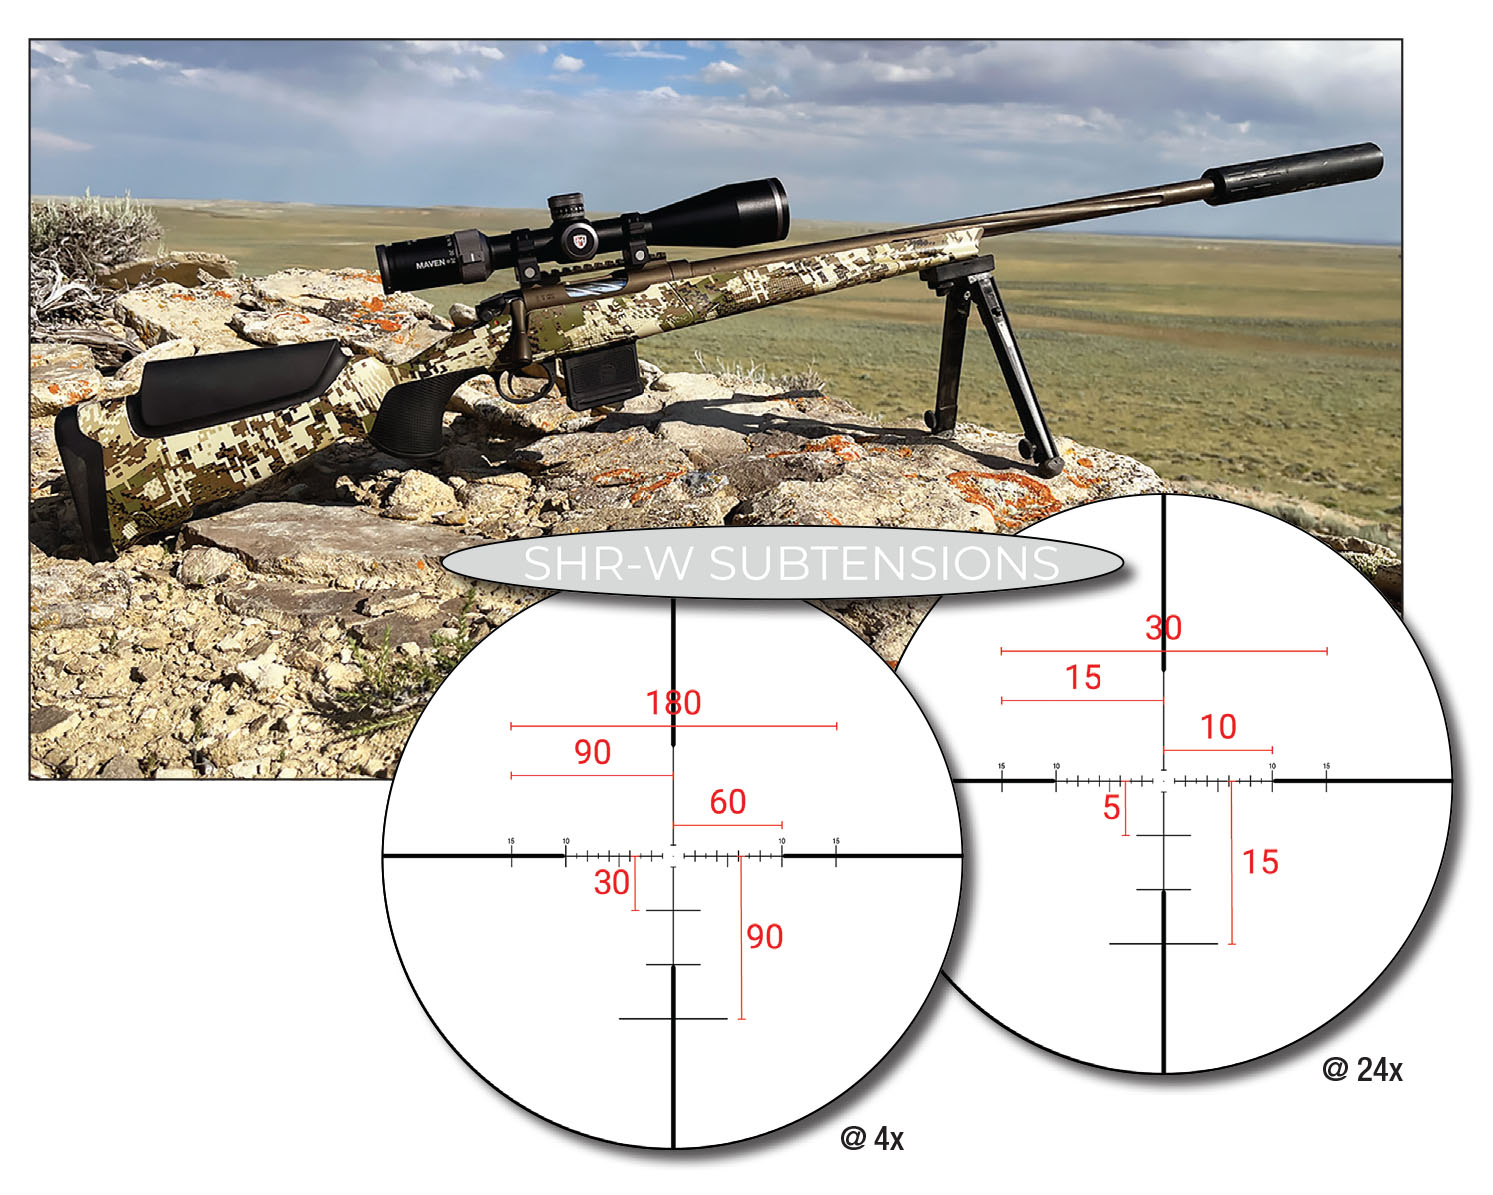 The Maven RS.5 4-24x 50mm SFP was mounted on a 224 Valkyrie-chambered Franchi Momentum Elite Varmint rifle in medium Nightforce X-Treme Duty Ultralite rings, an outfit that proved its worth in western Wyoming.